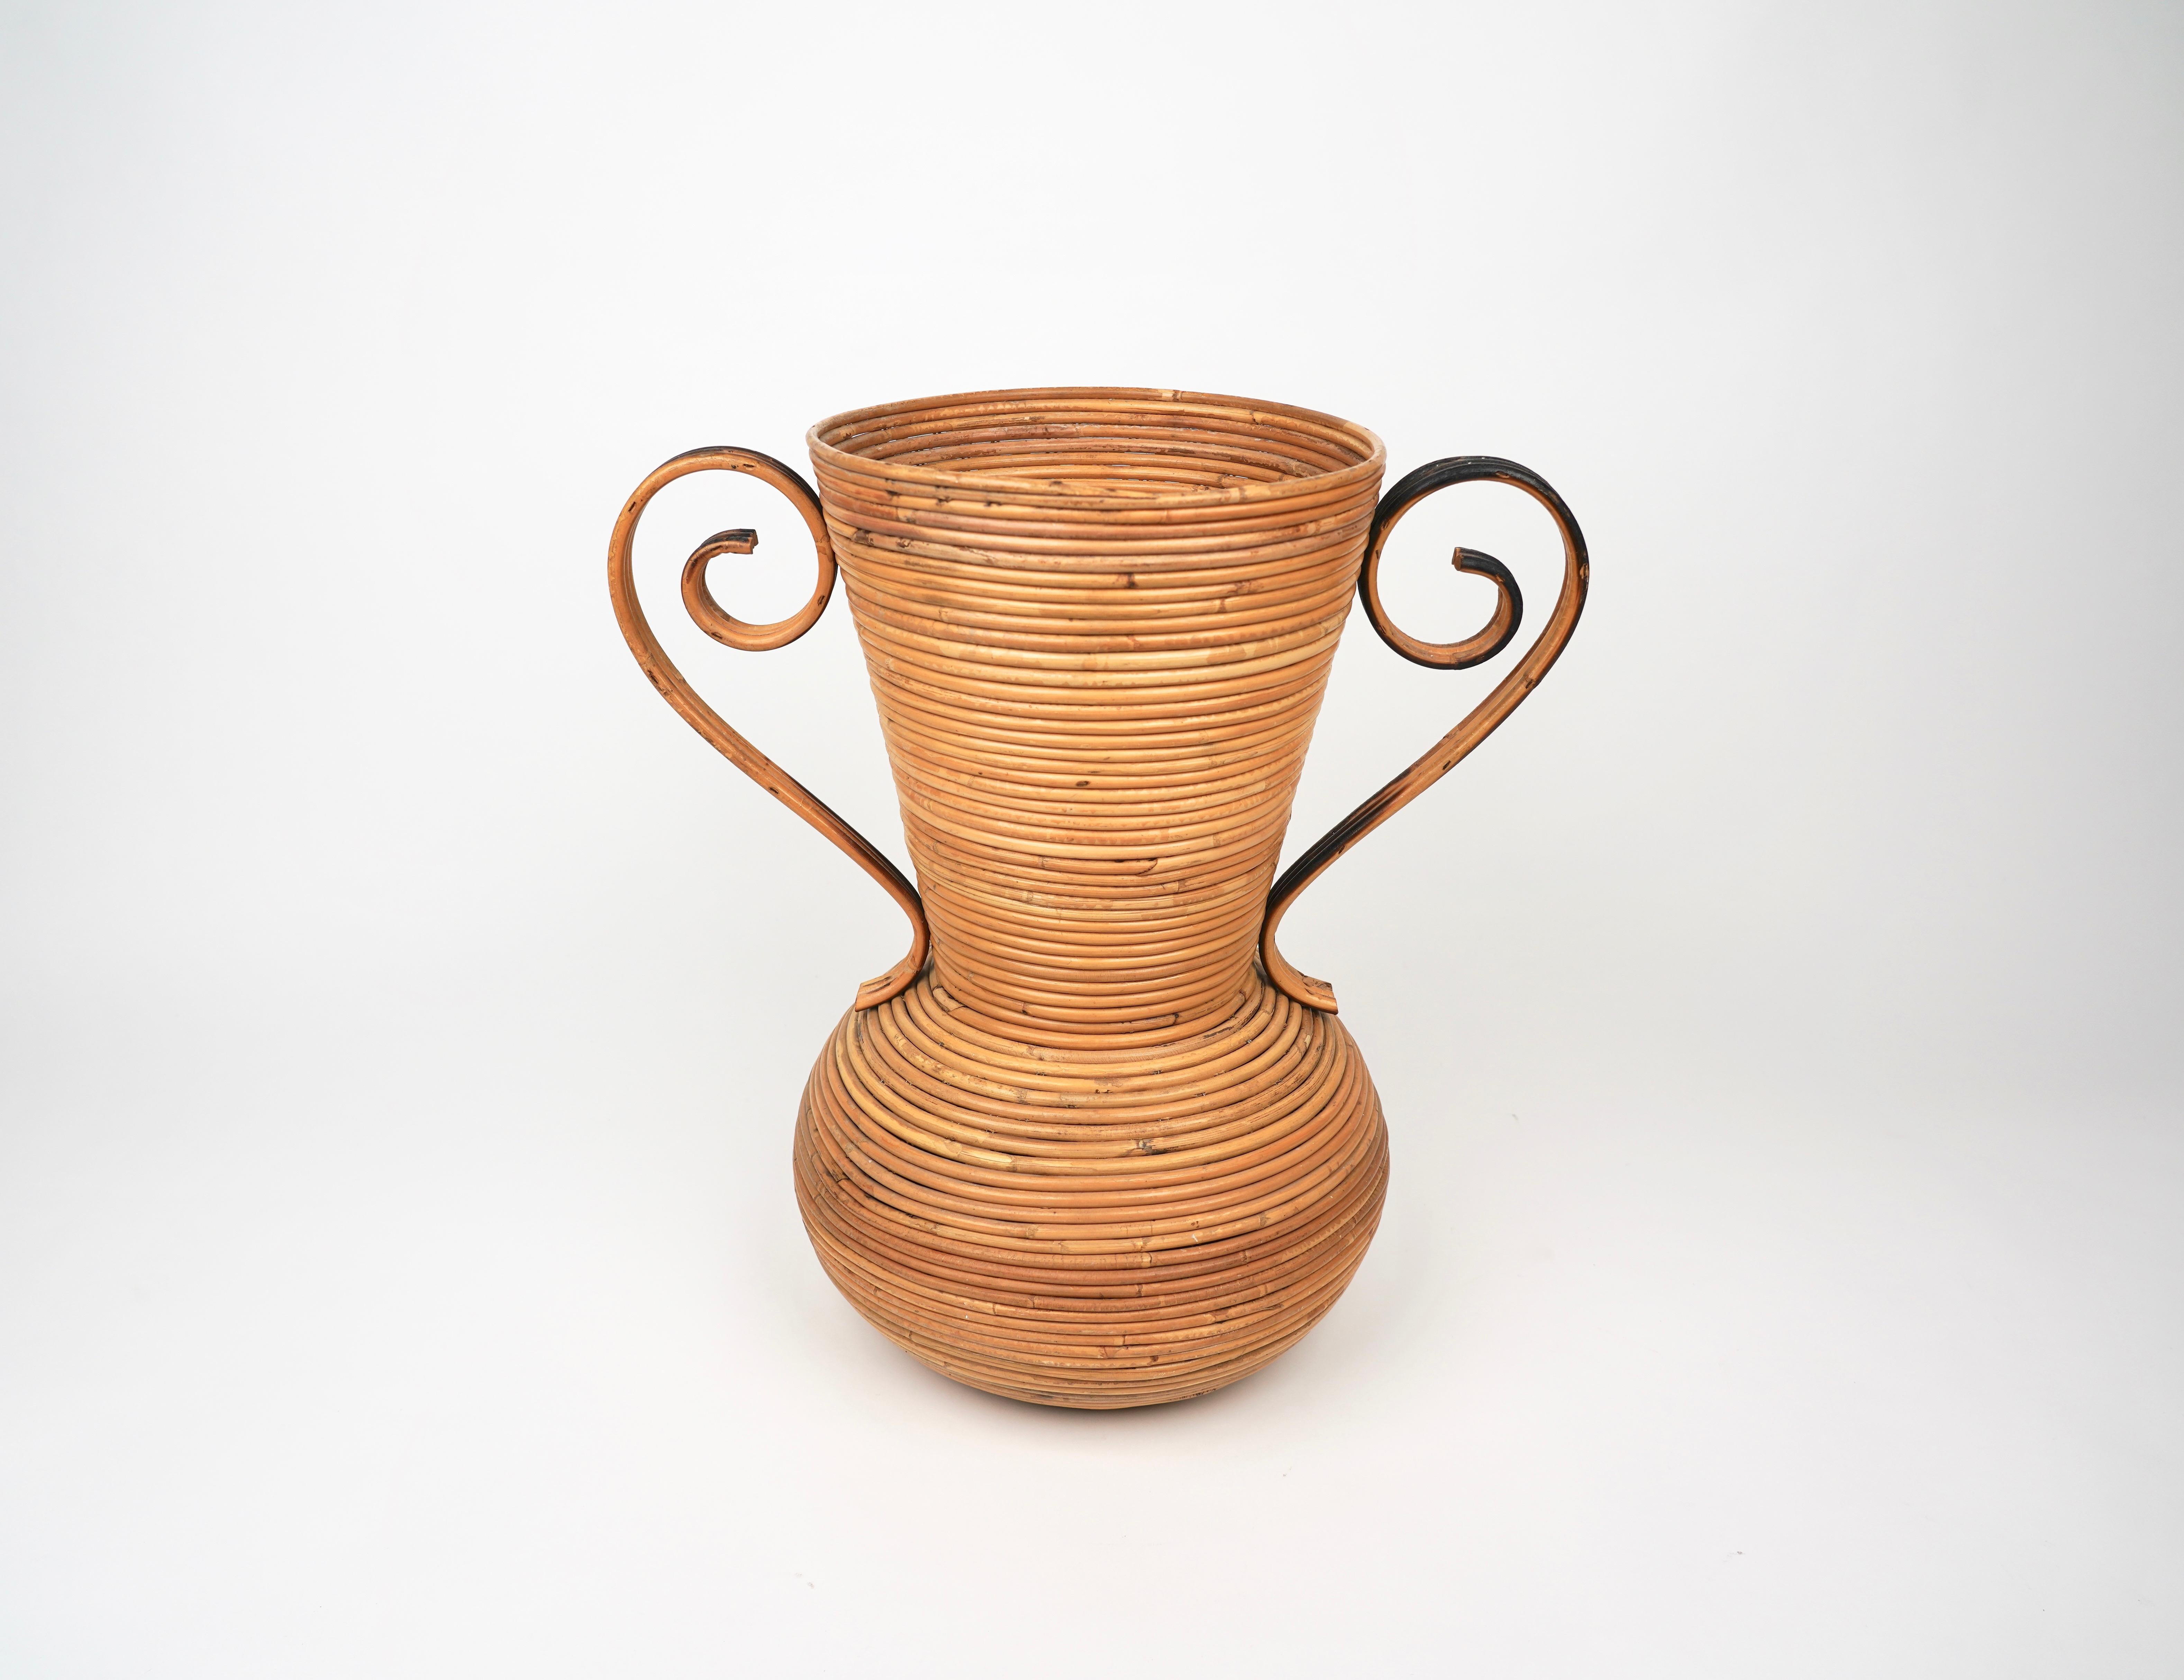 1960s Rattan vase with two handles in the shape of an ancient Amphora by Vivai del Sud, Rome, Italy.